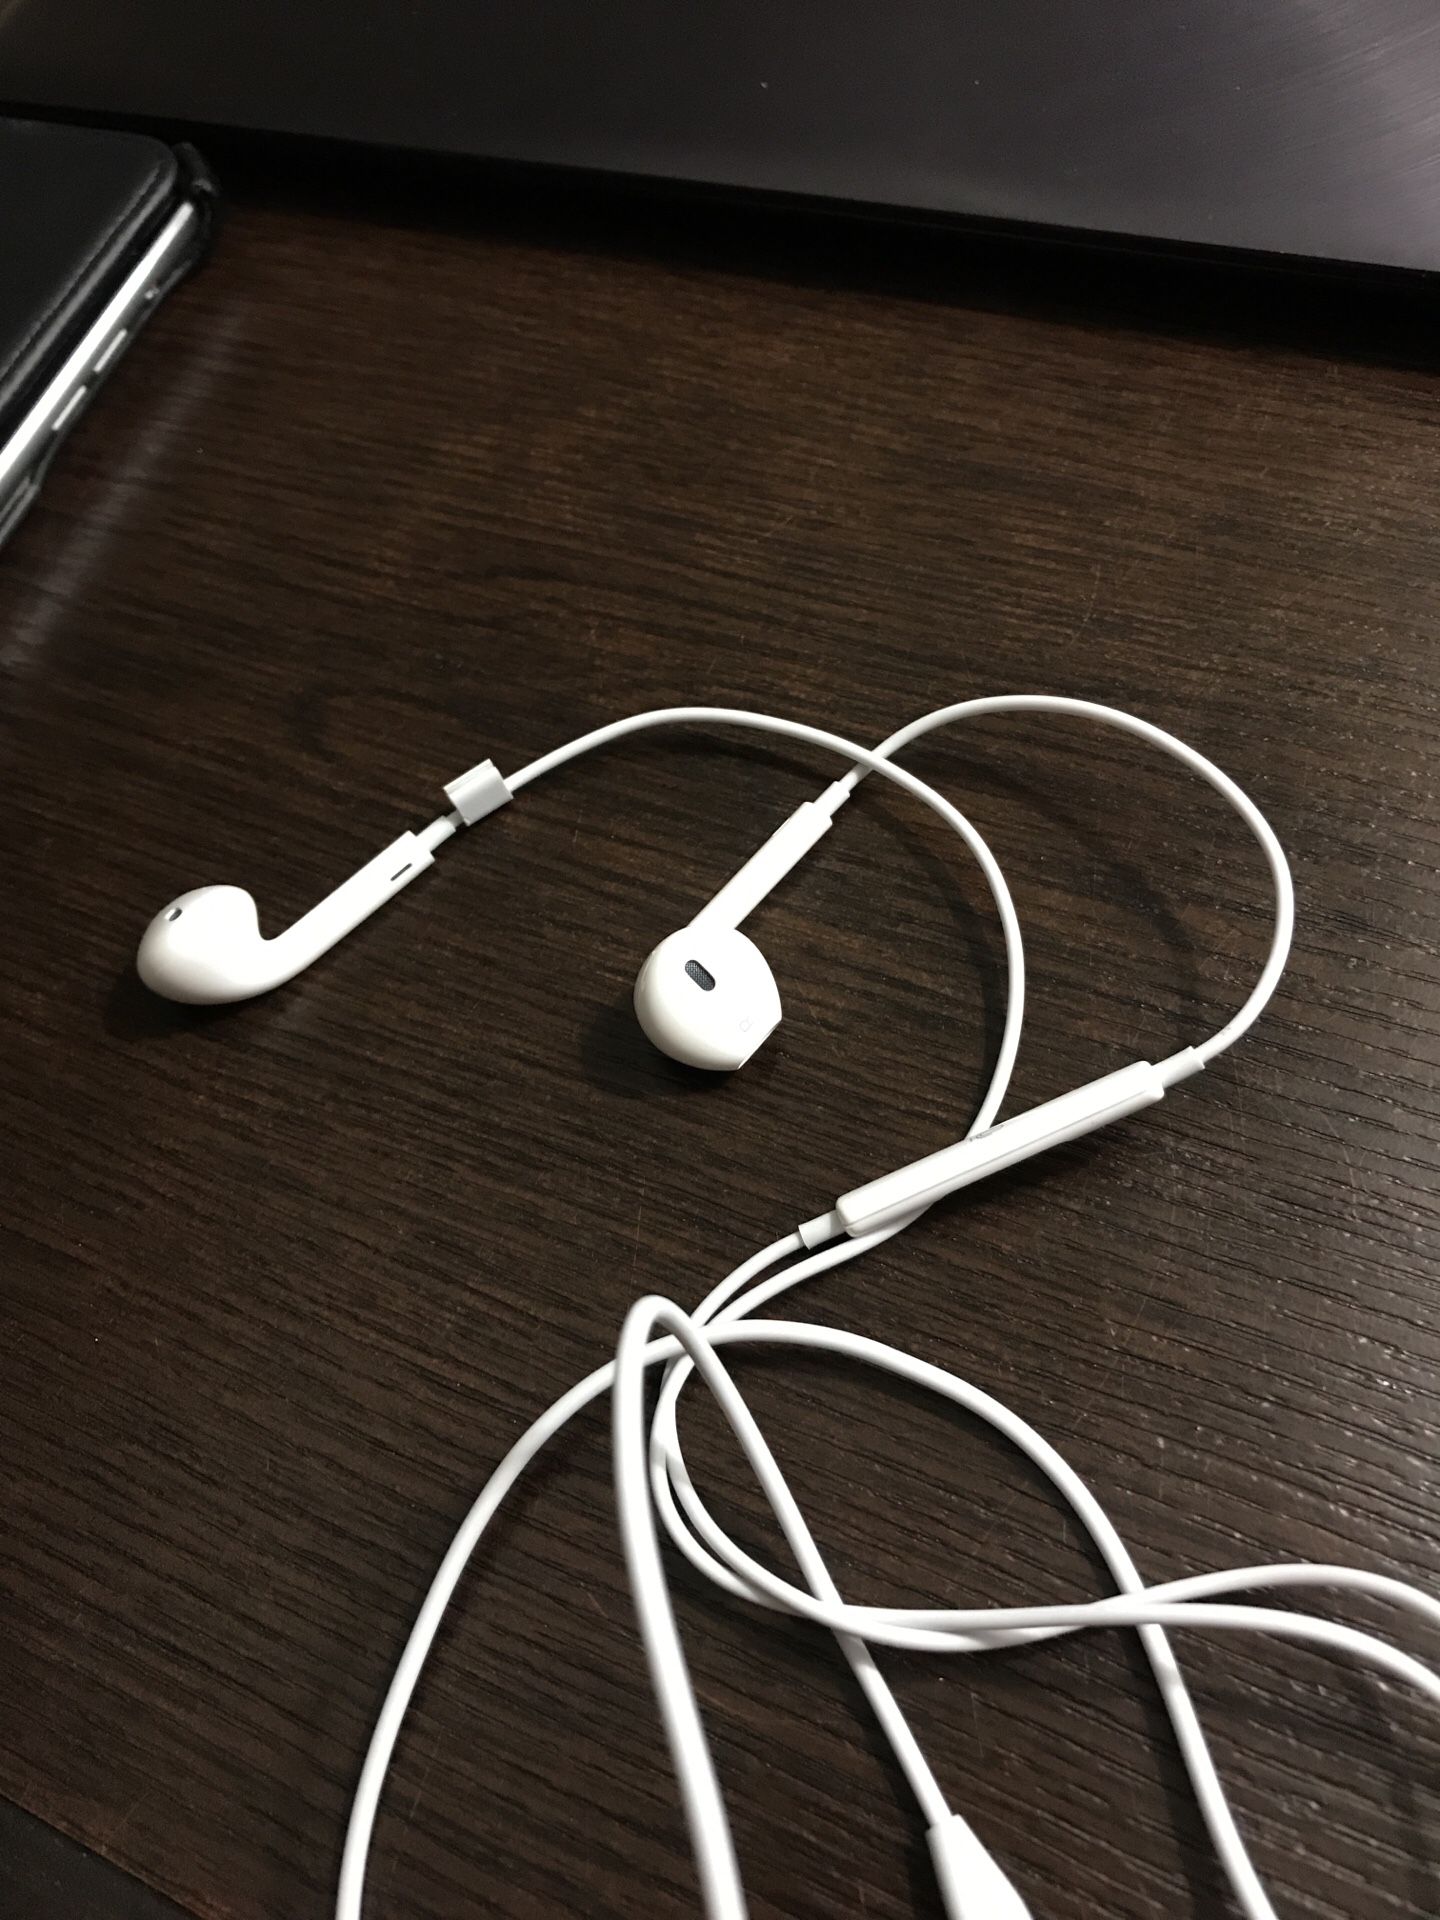 Apple earbuds with microphone and volume adjustment